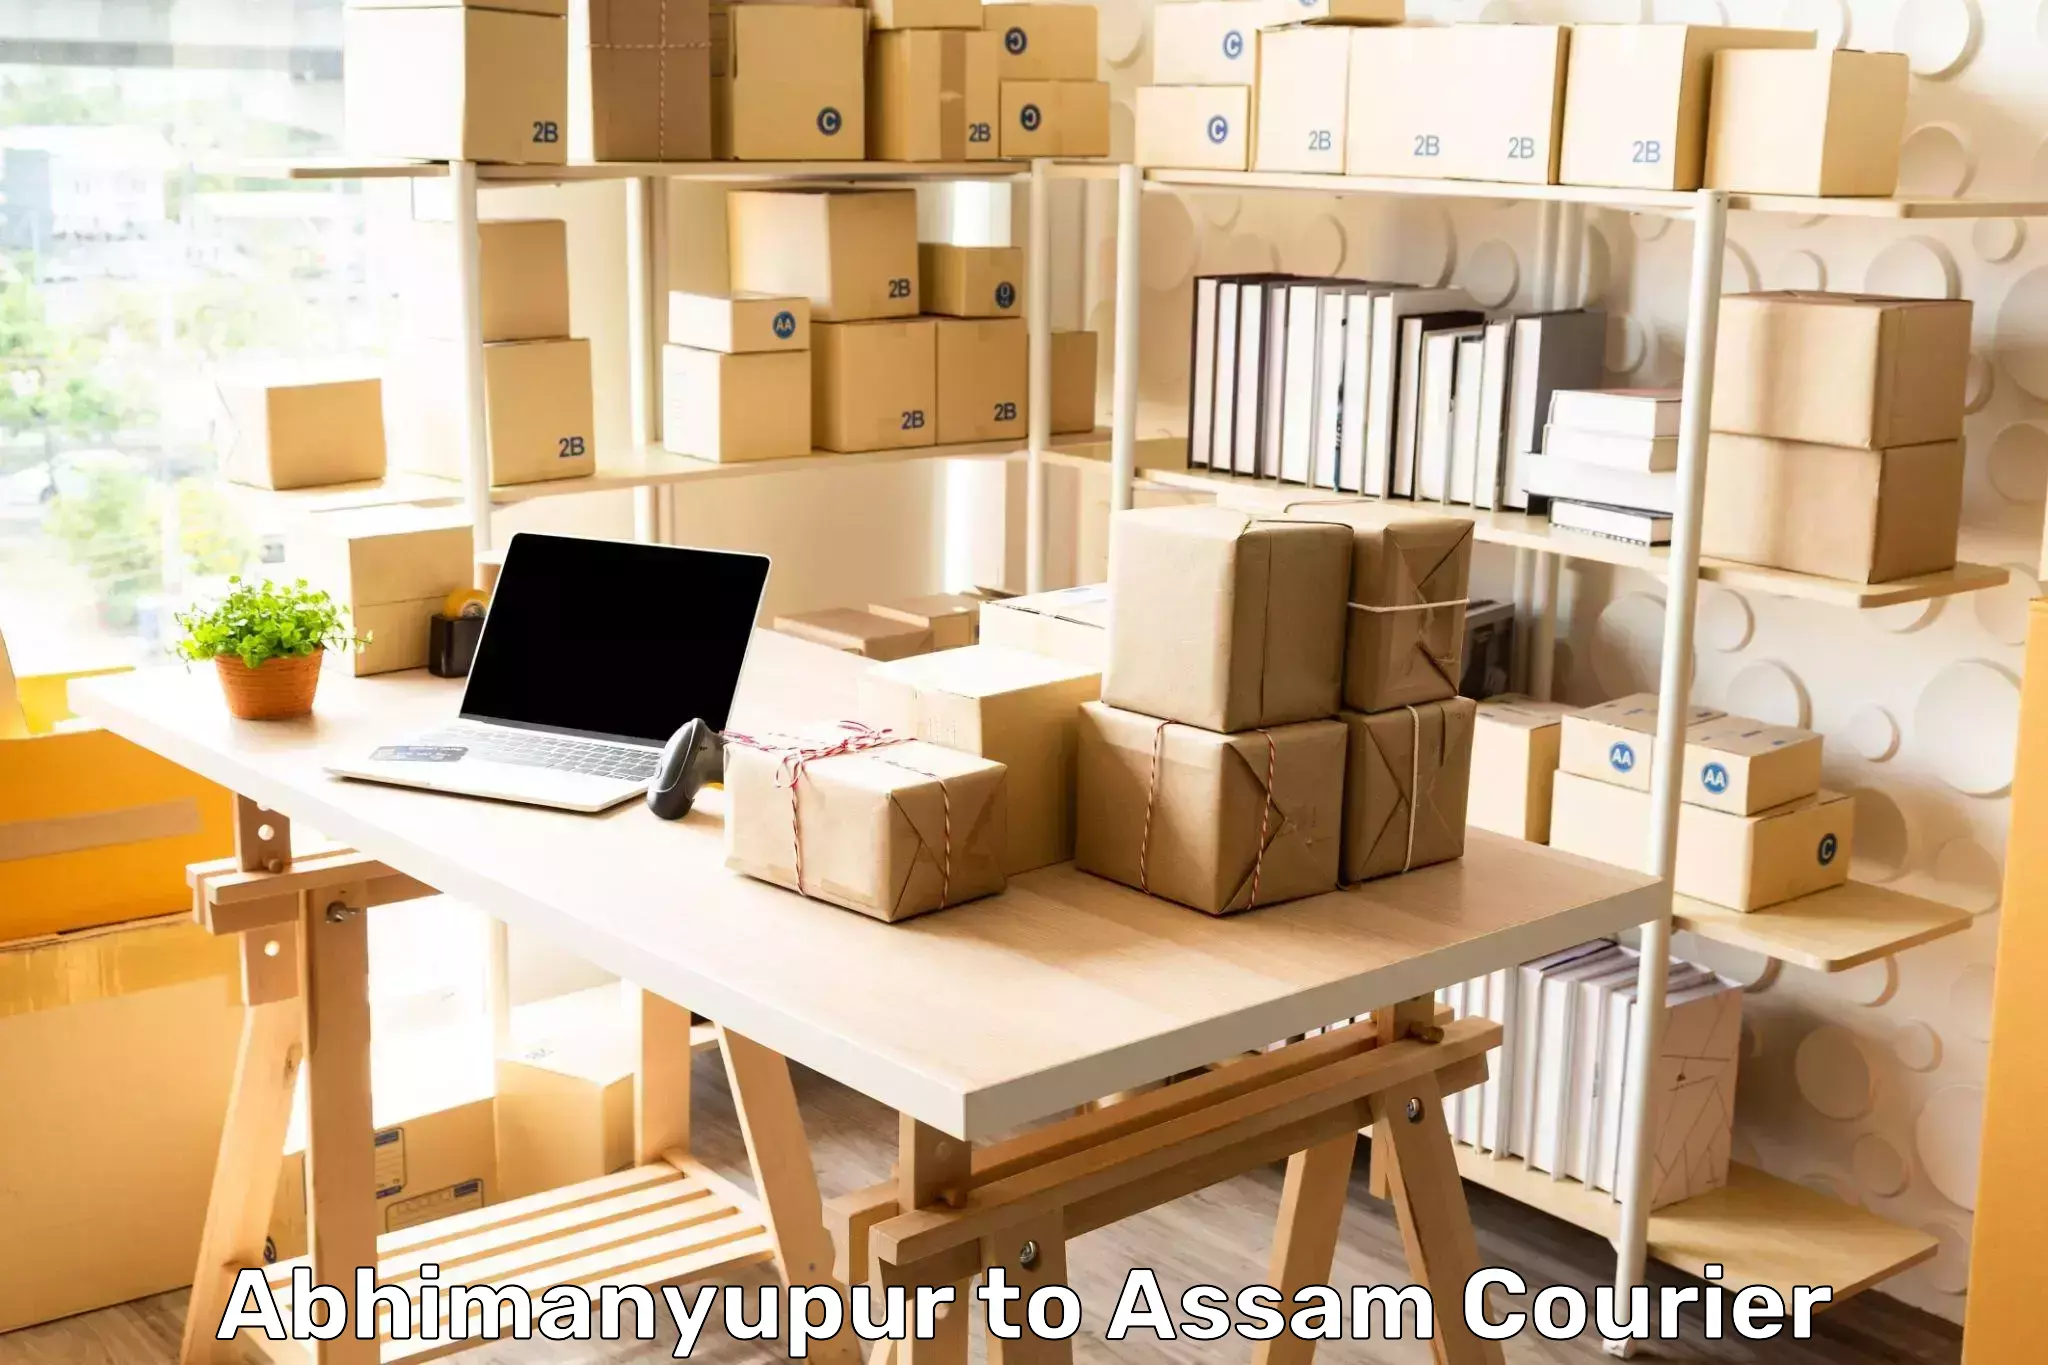 High-capacity courier solutions Abhimanyupur to Dhupdhara